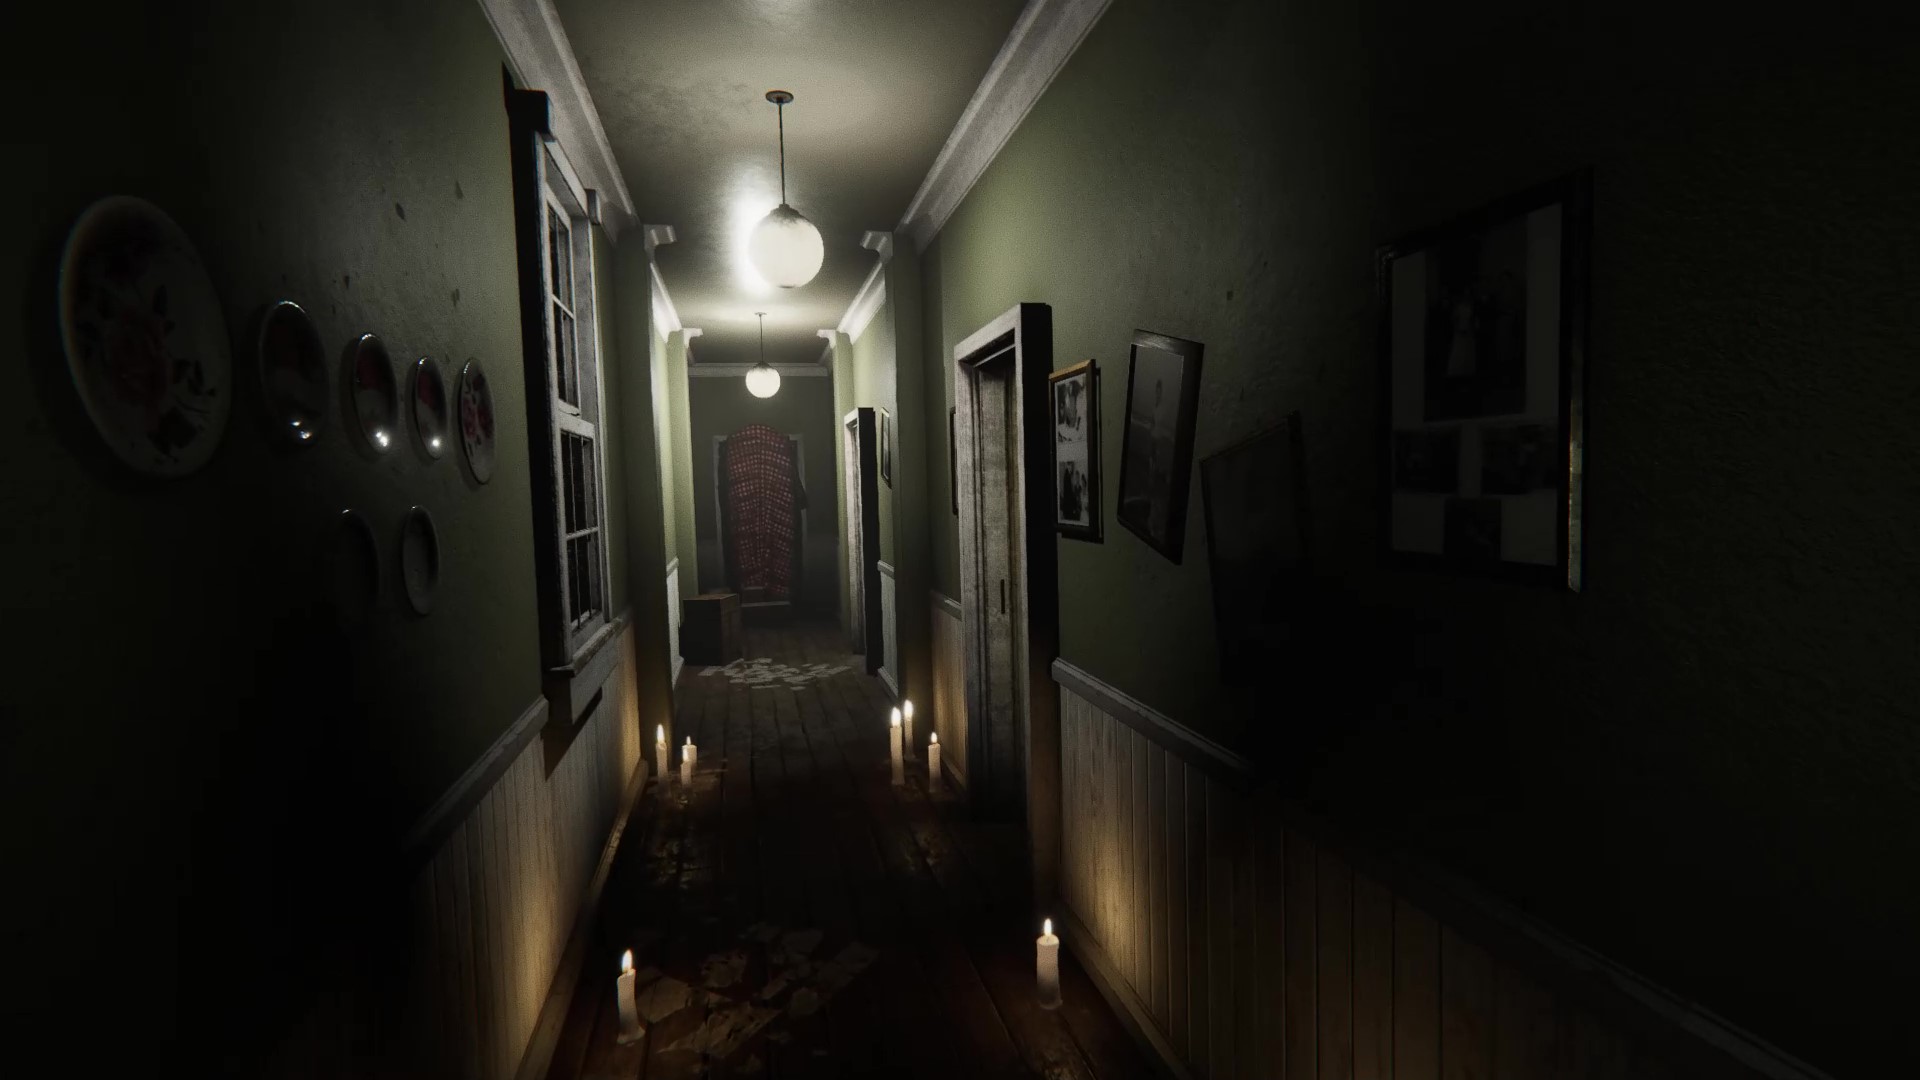 Eyes - The Horror Game Tips to Surviving With Your Voice Intact